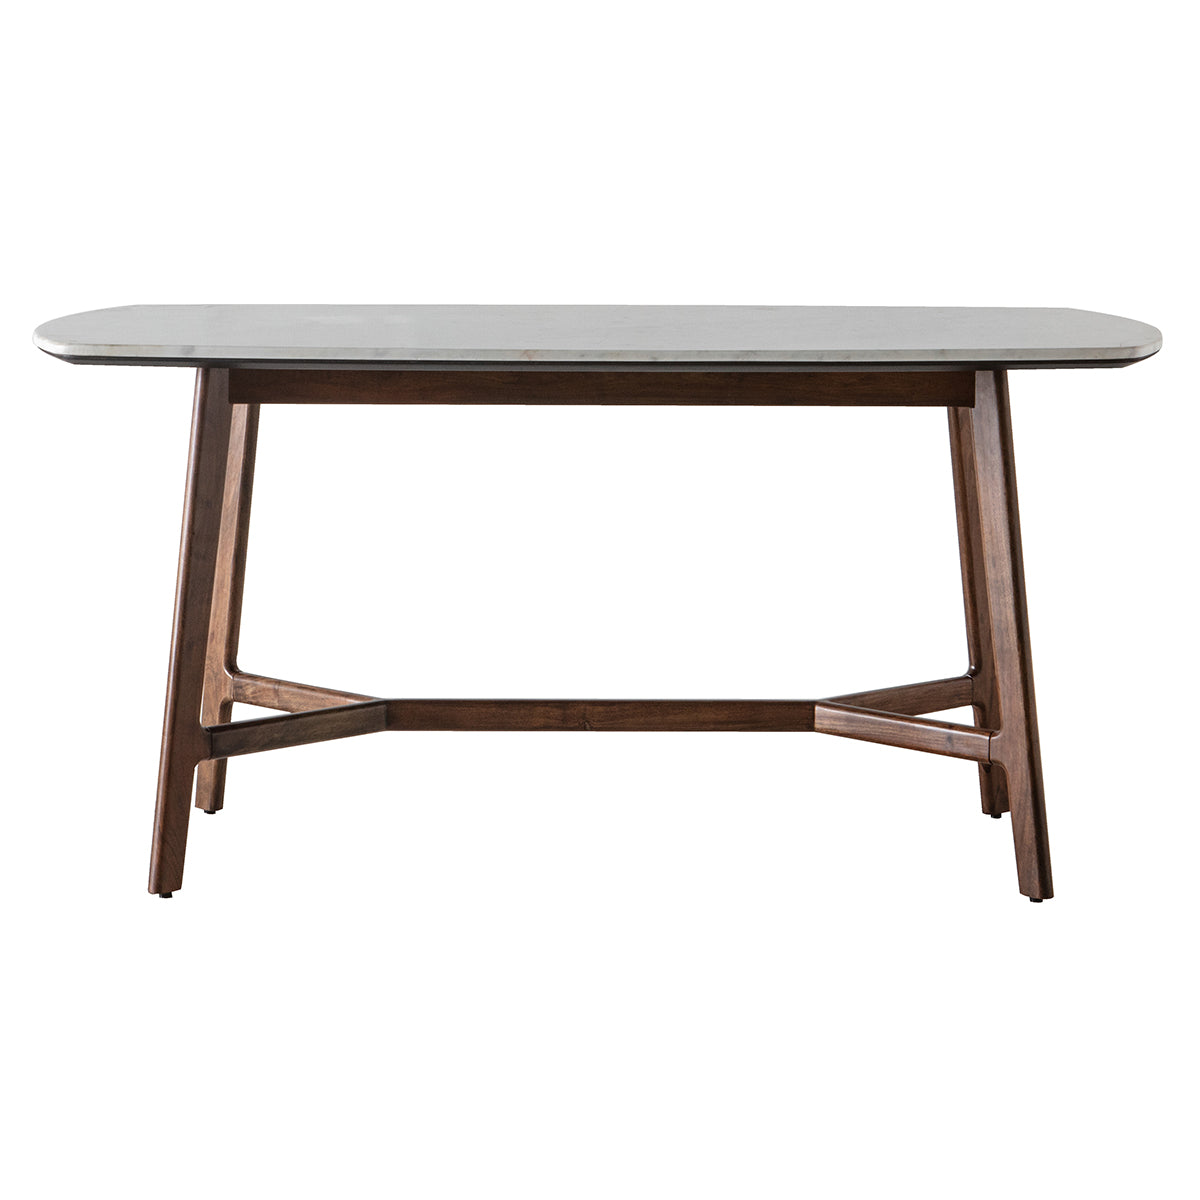 An Avonwick Dining Table with wooden legs and marble top - perfect for interior decor and home furniture.